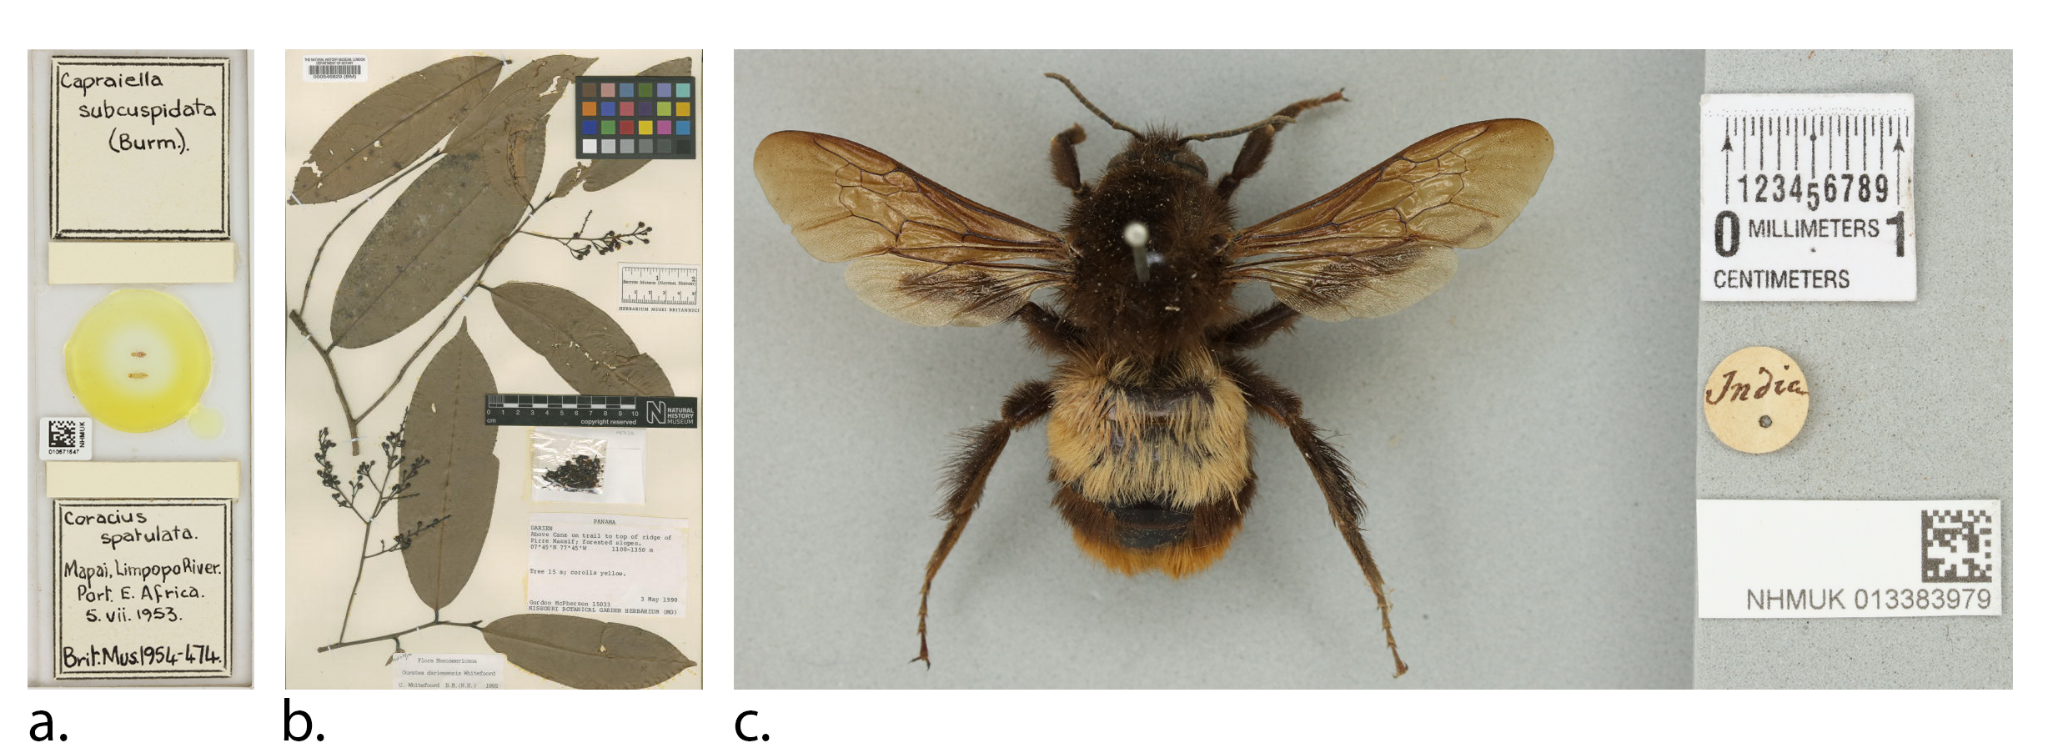 From the Natural History Museum, London, demonstrating the diversity of collection objects, which include handwritten, typed, and printed labels. (a) Microscope slide (NHMUK010671647), (b) Herbarium specimen (BM000546829), (c) pinned insect (NHMUK013383979)